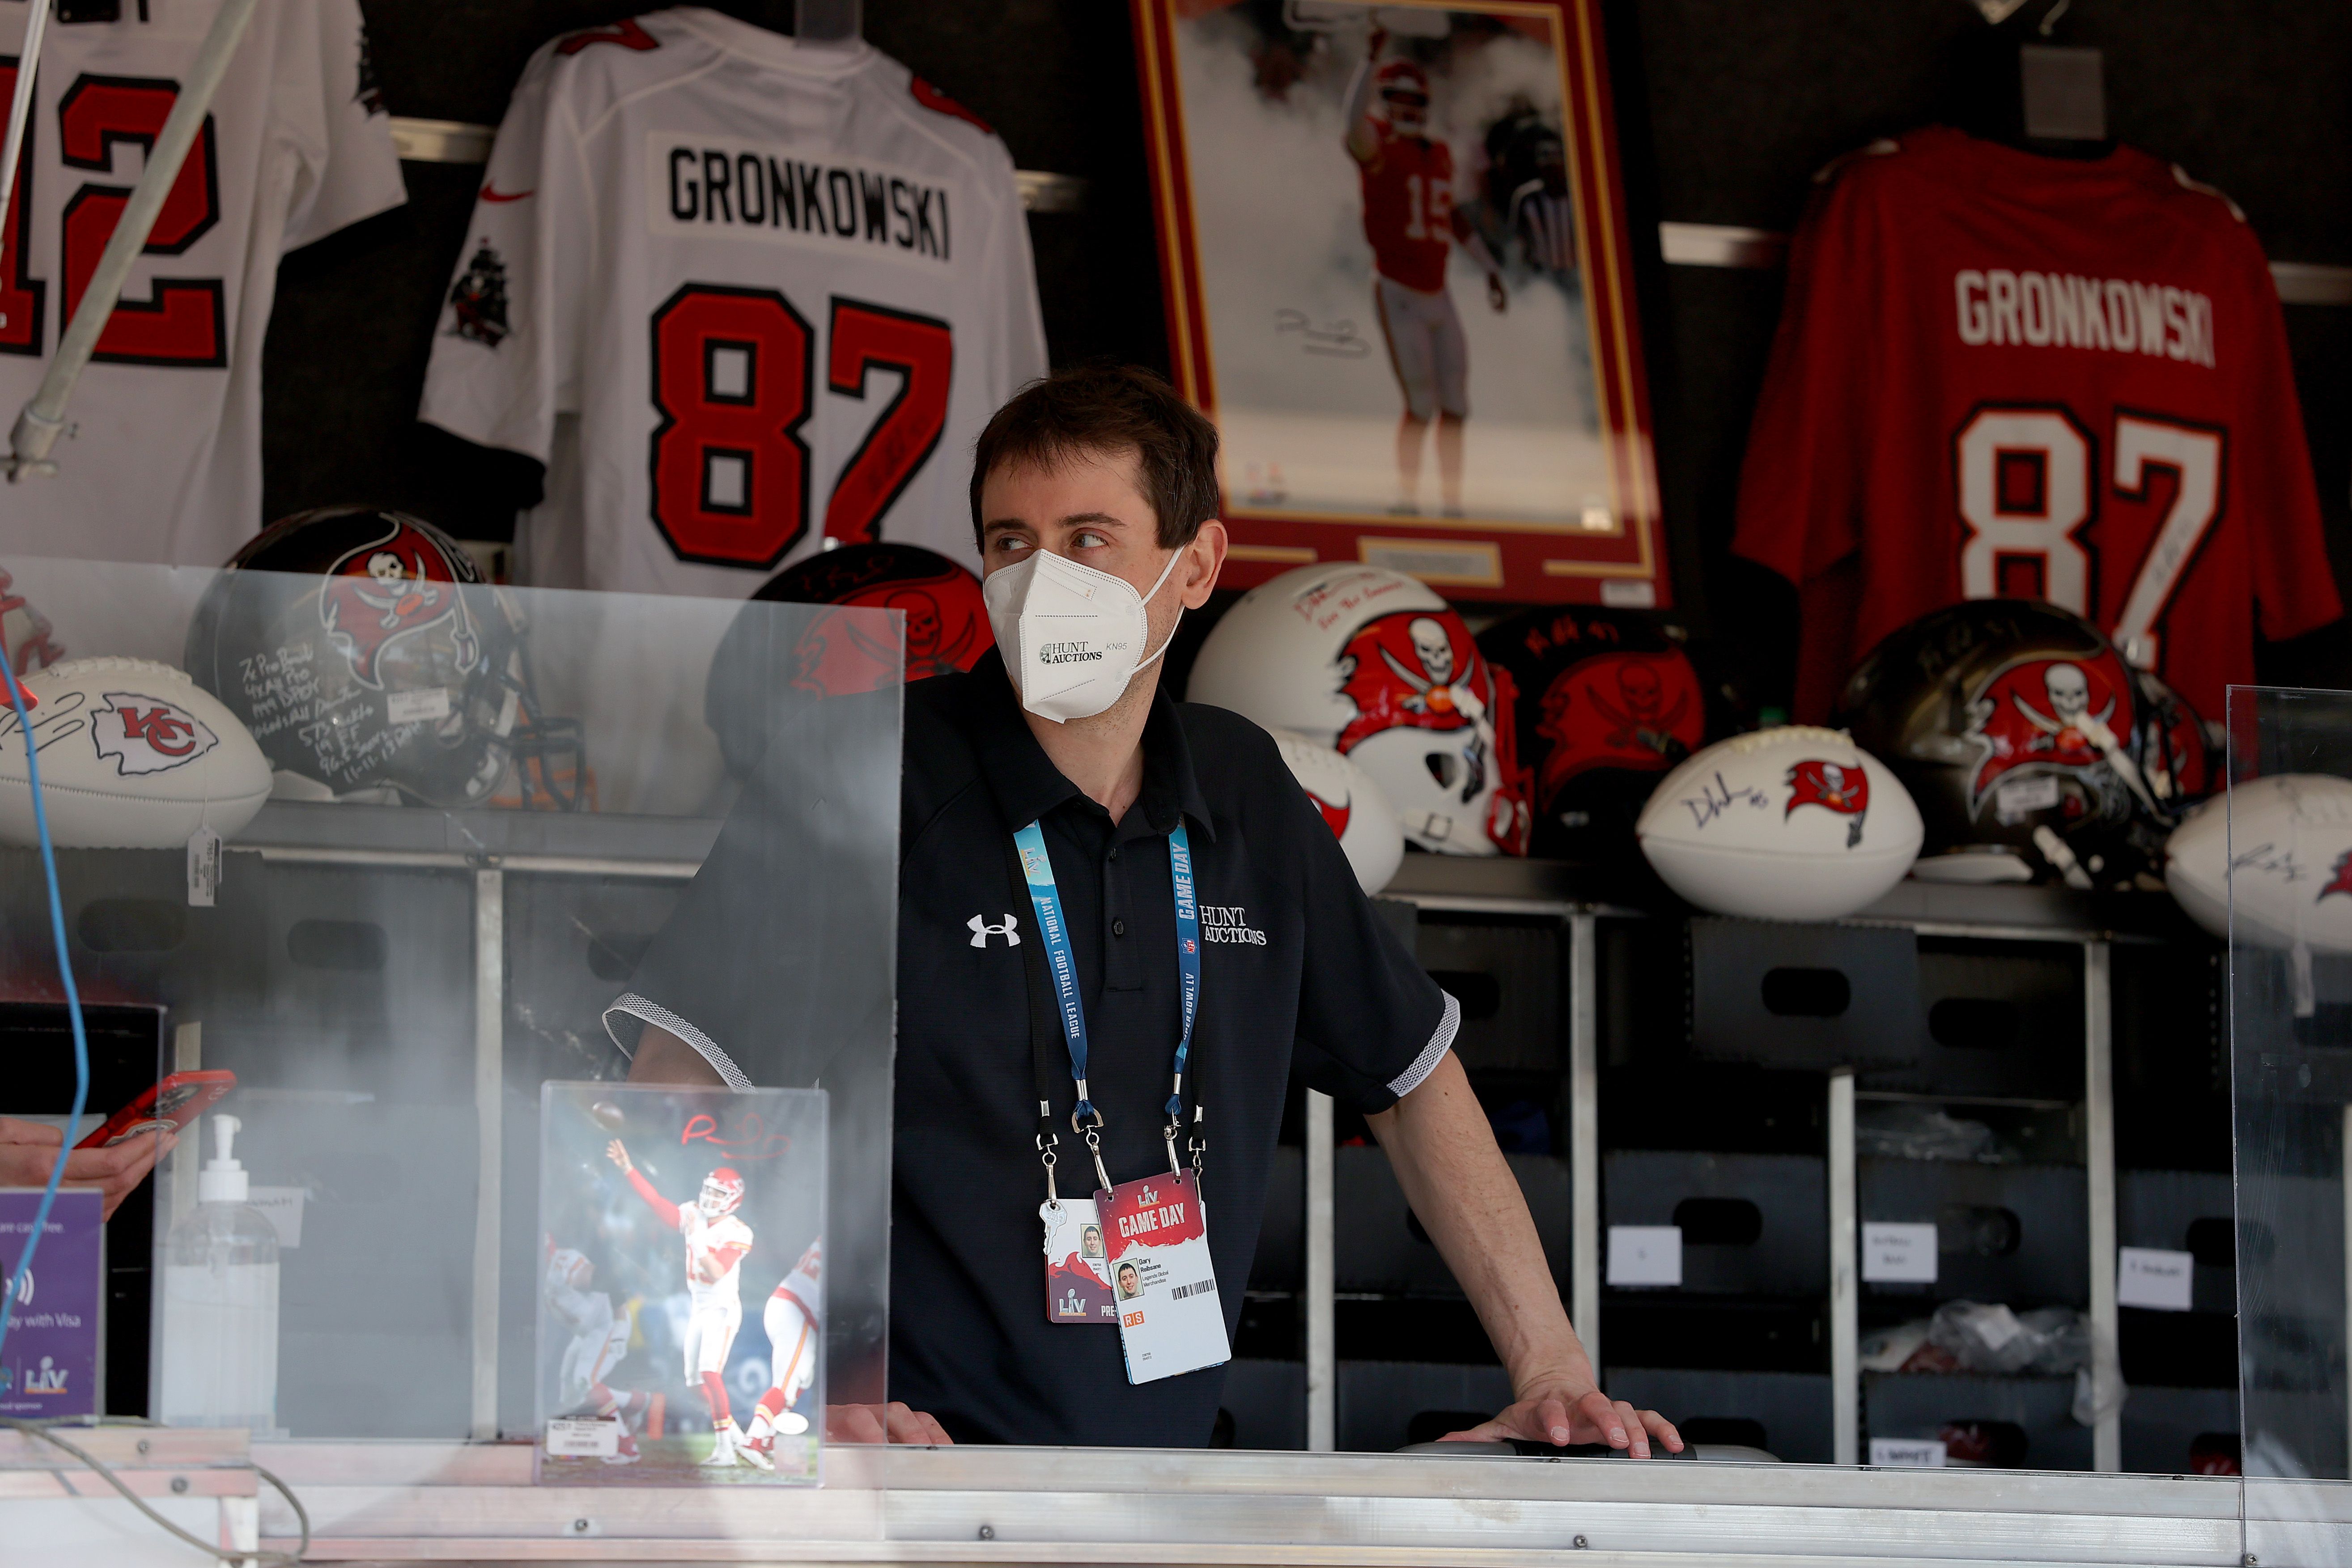 A vendor sells merchandise before Super Bowl LV between the Tampa Bay Buccaneers and the Kansas City Chiefs at Raymond James Stadium on February 07, 2021 in Tampa, Florida.